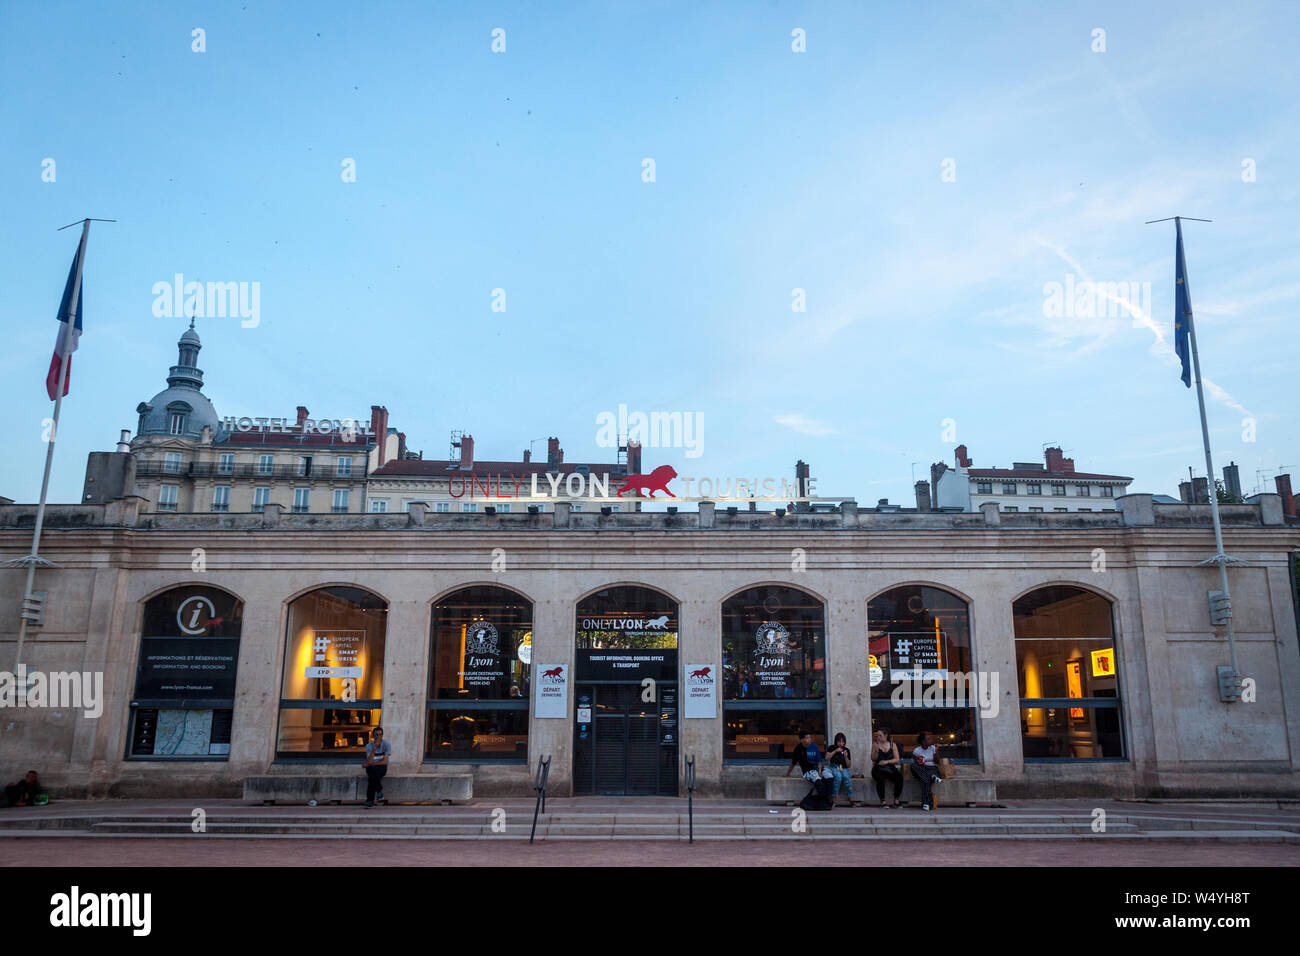 LYON, FRANCE - JULY 17, 2019: Only Lyon sign on the Tourism office of Bellecour Square at night. It is the visual branding identity used for tourism a Stock Photo